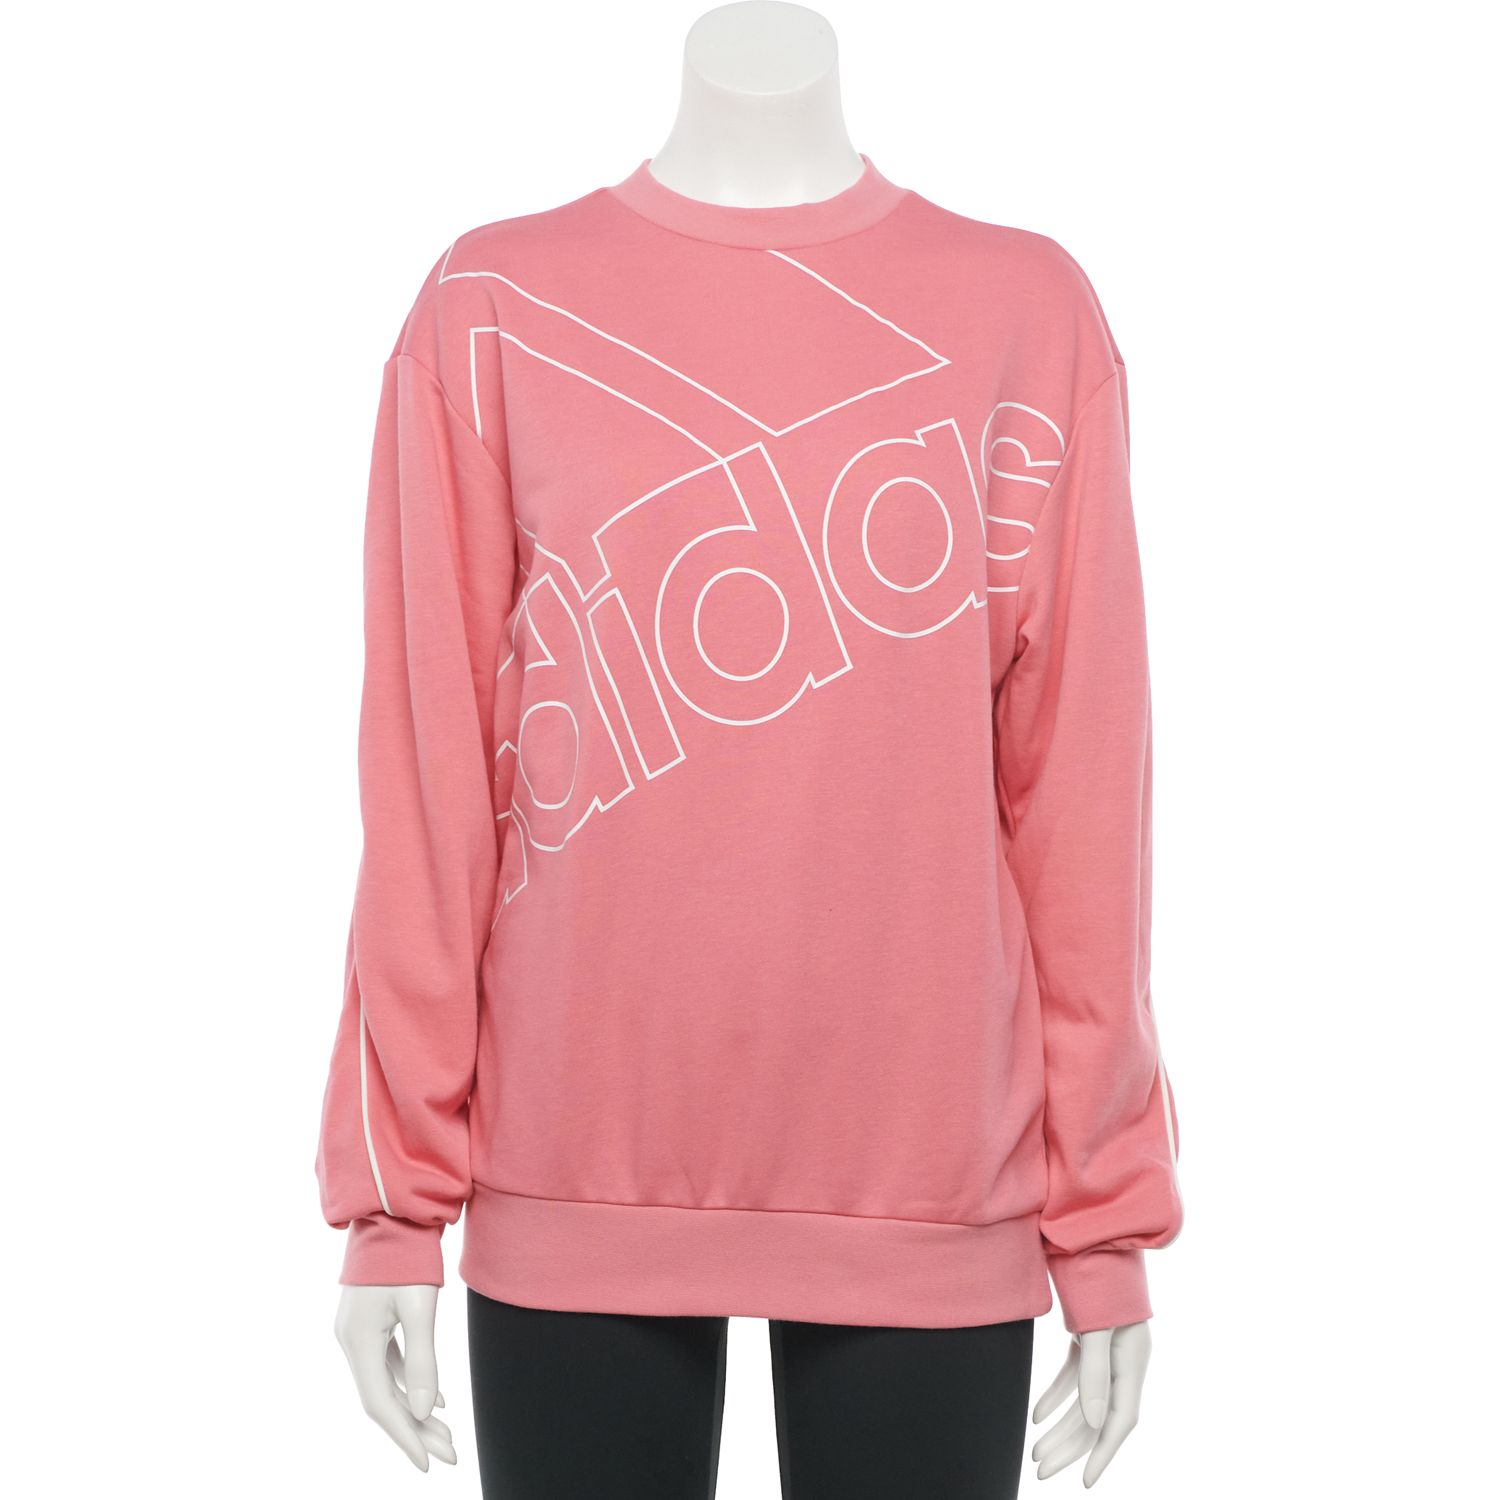 pink and white adidas outfit